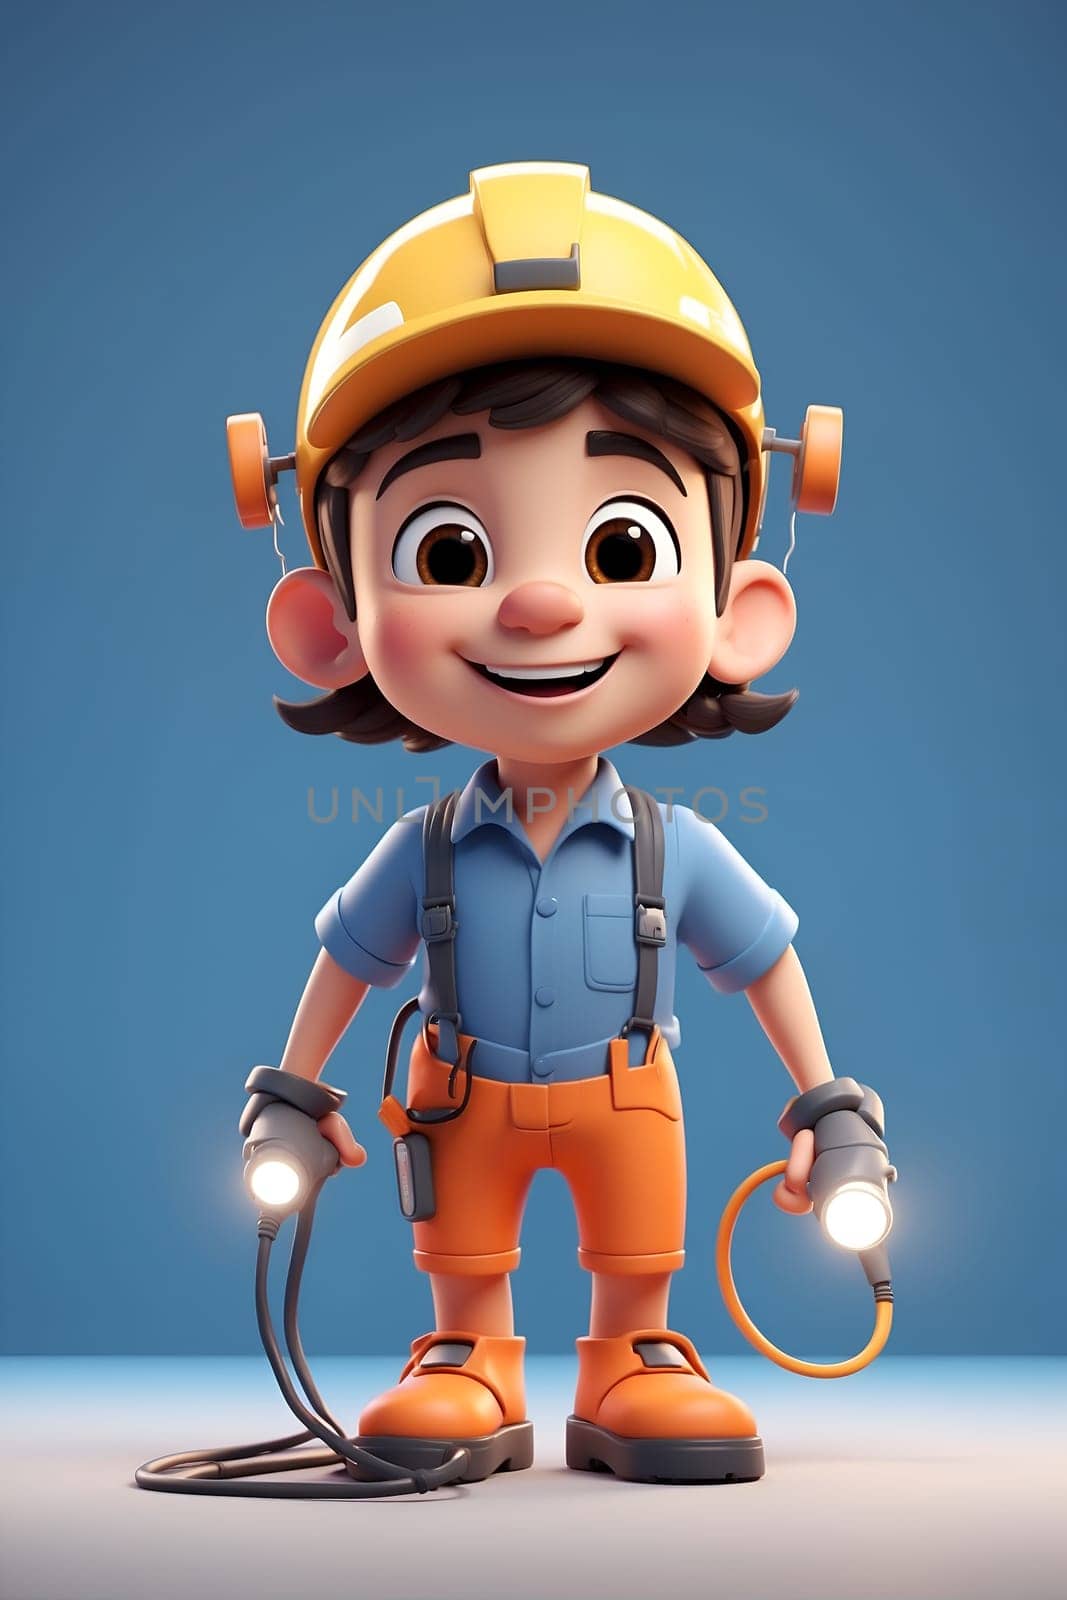 A vibrant cartoon character with a brilliantly lit light on its head.